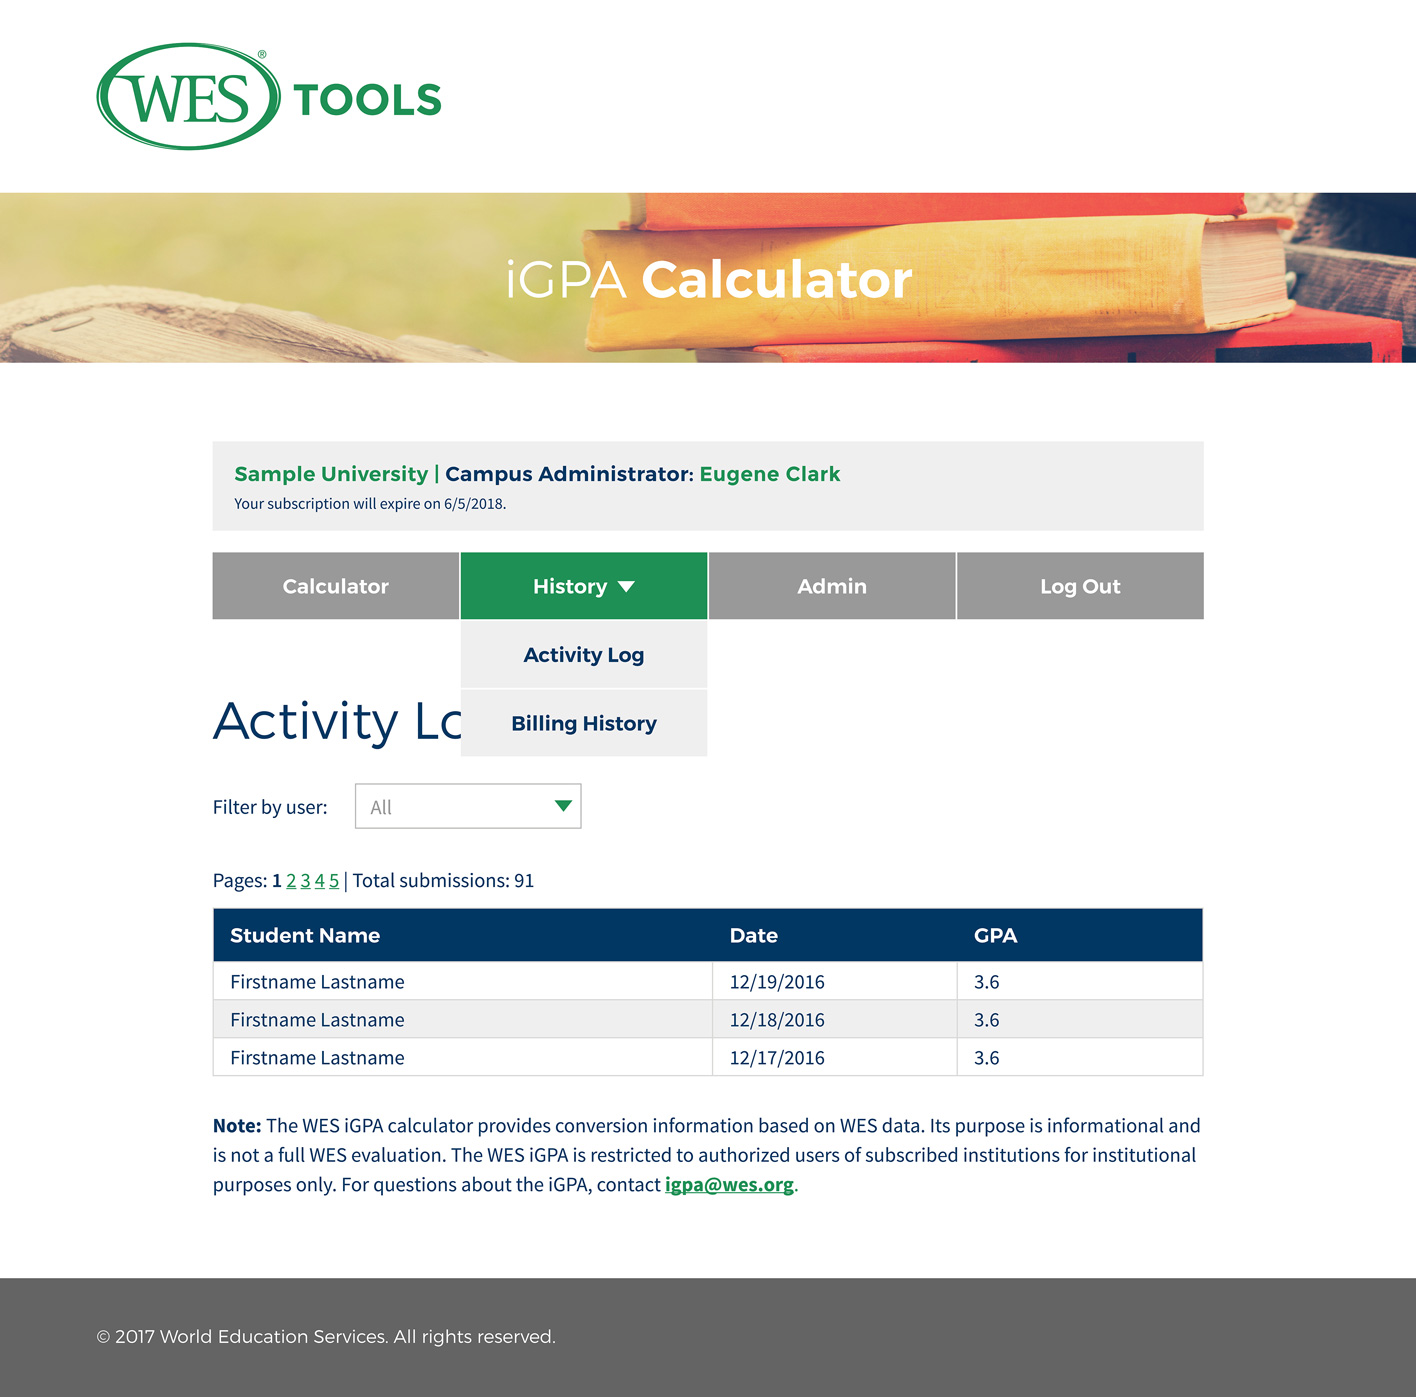 Design for the history page of World Education Services' iGPA calendar. Includes active nav for history with dropdown for activity log and billing history, and list of students, dates, and GPAs. 